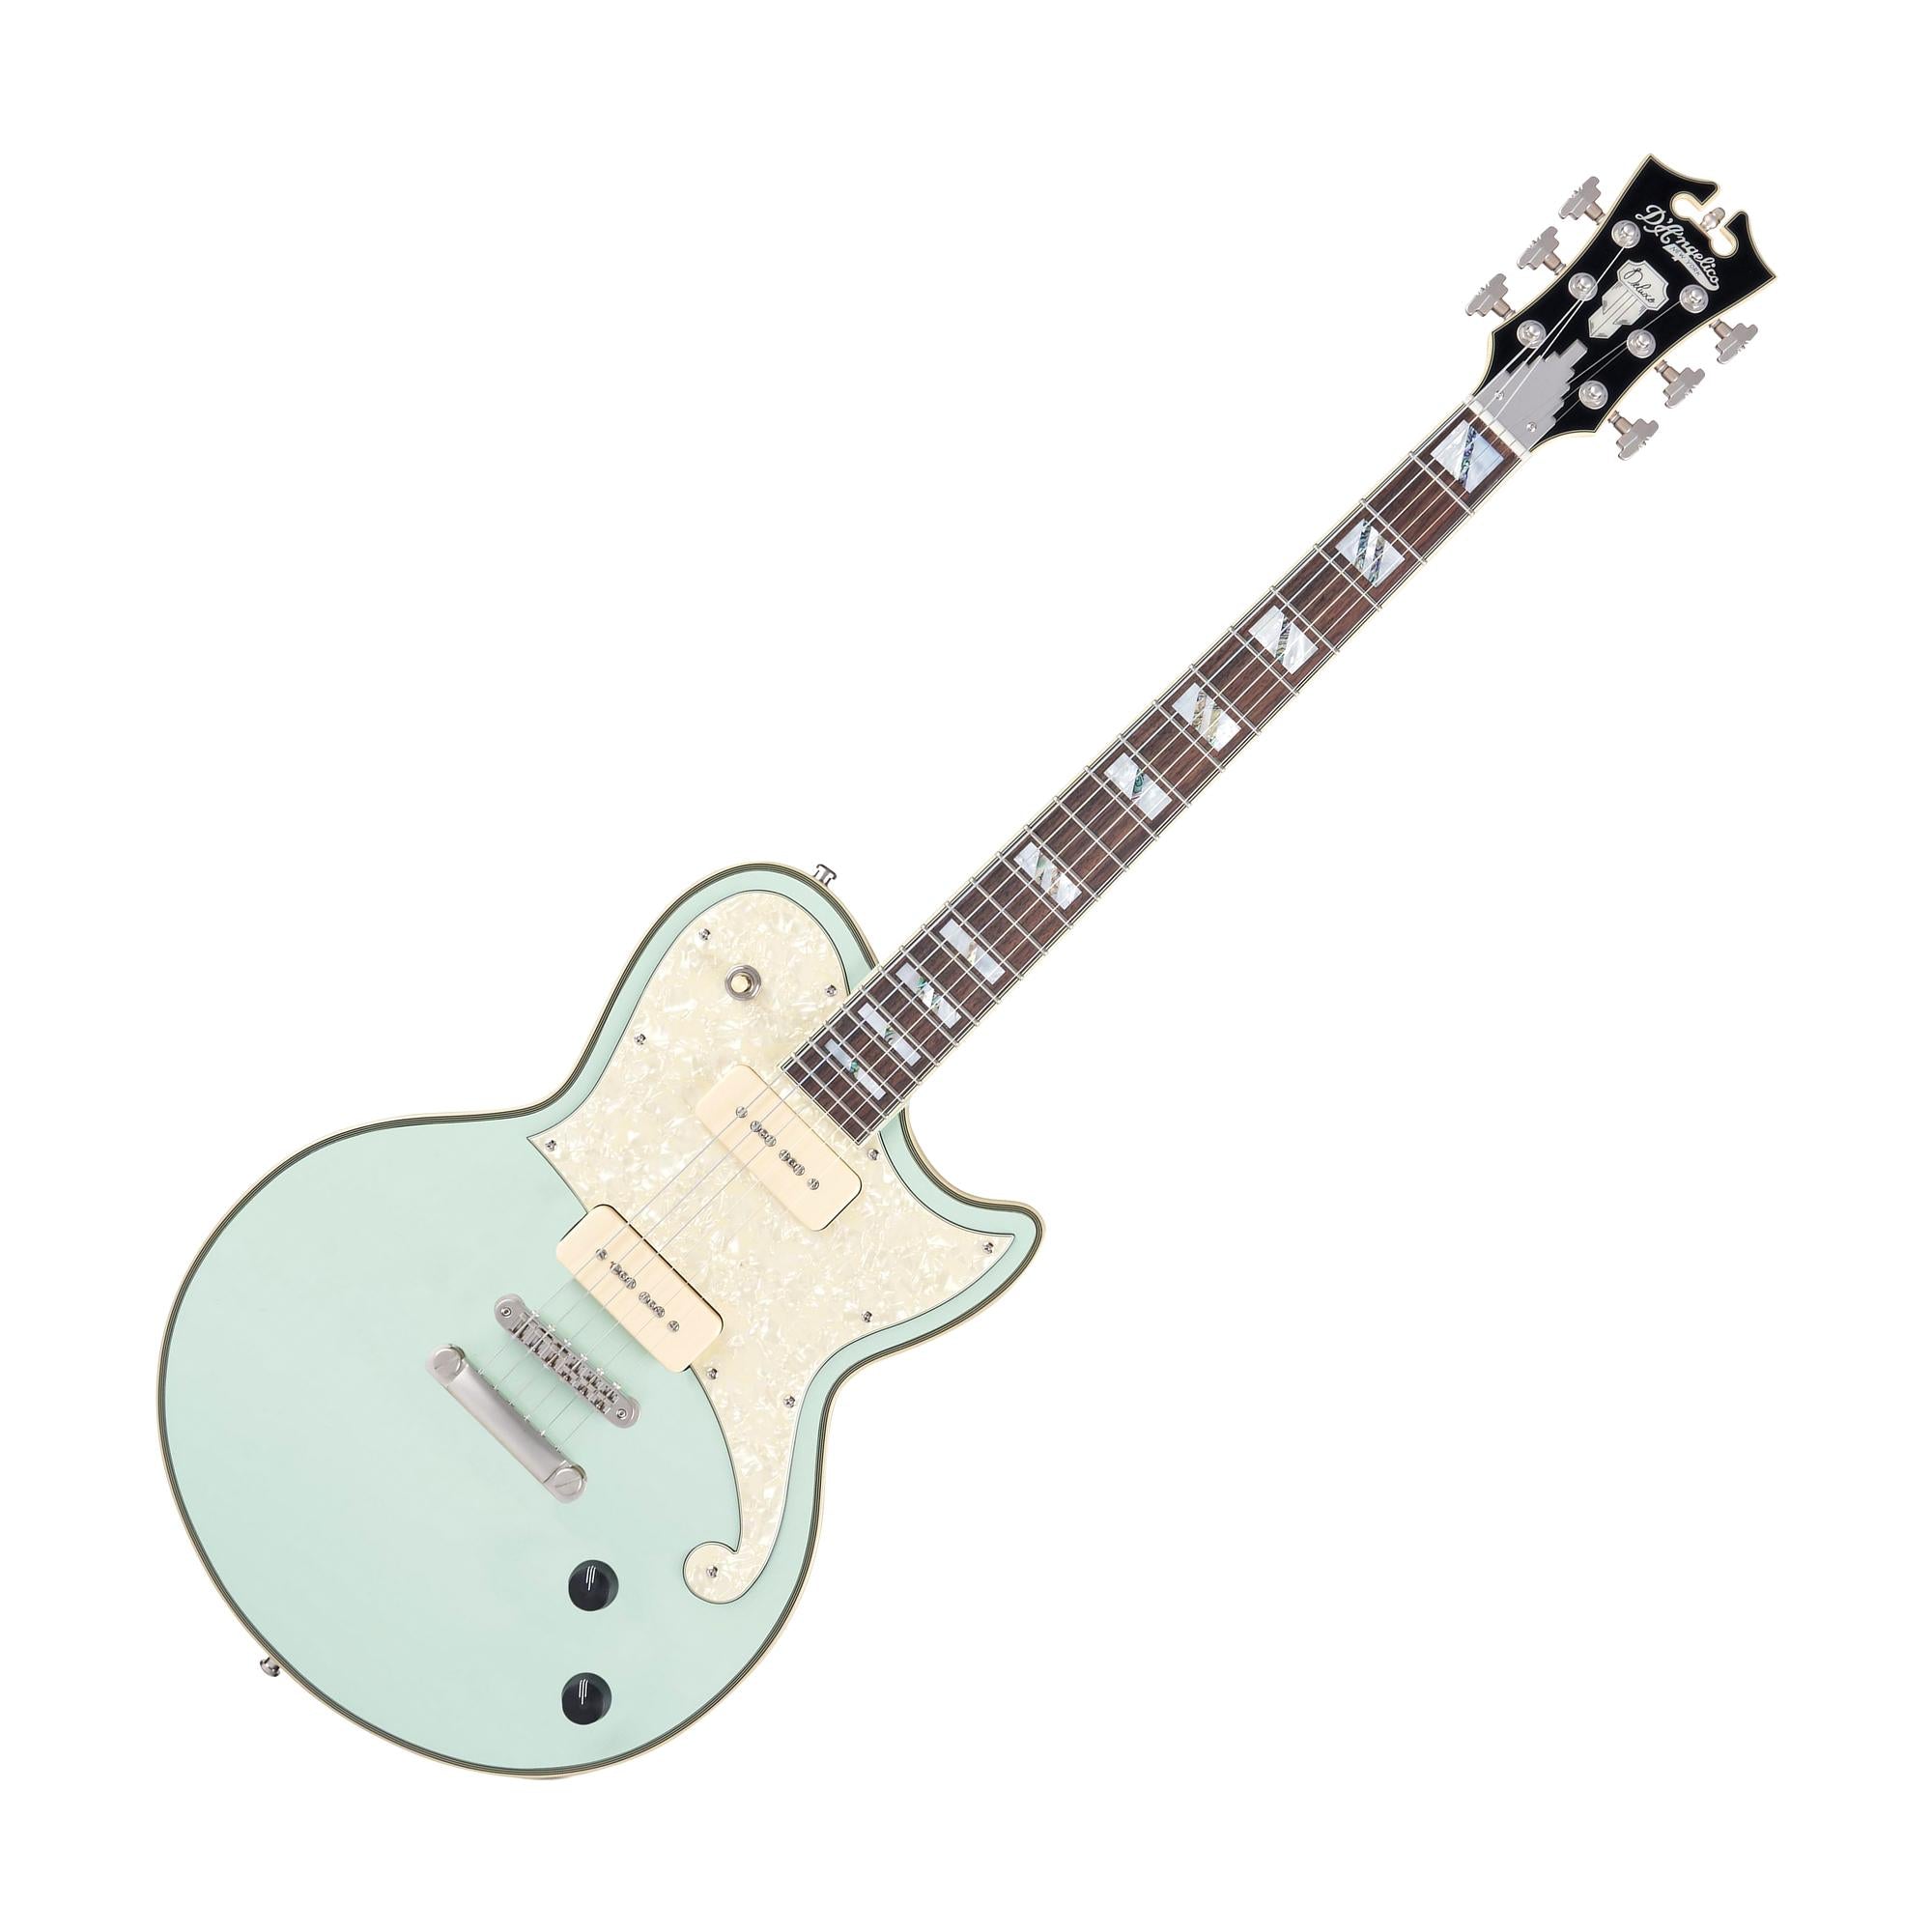 D'Angelico DADATLSAGESNS Deluxe Atlantic Limited Edition Electric Guitar w/P-90's, Sage